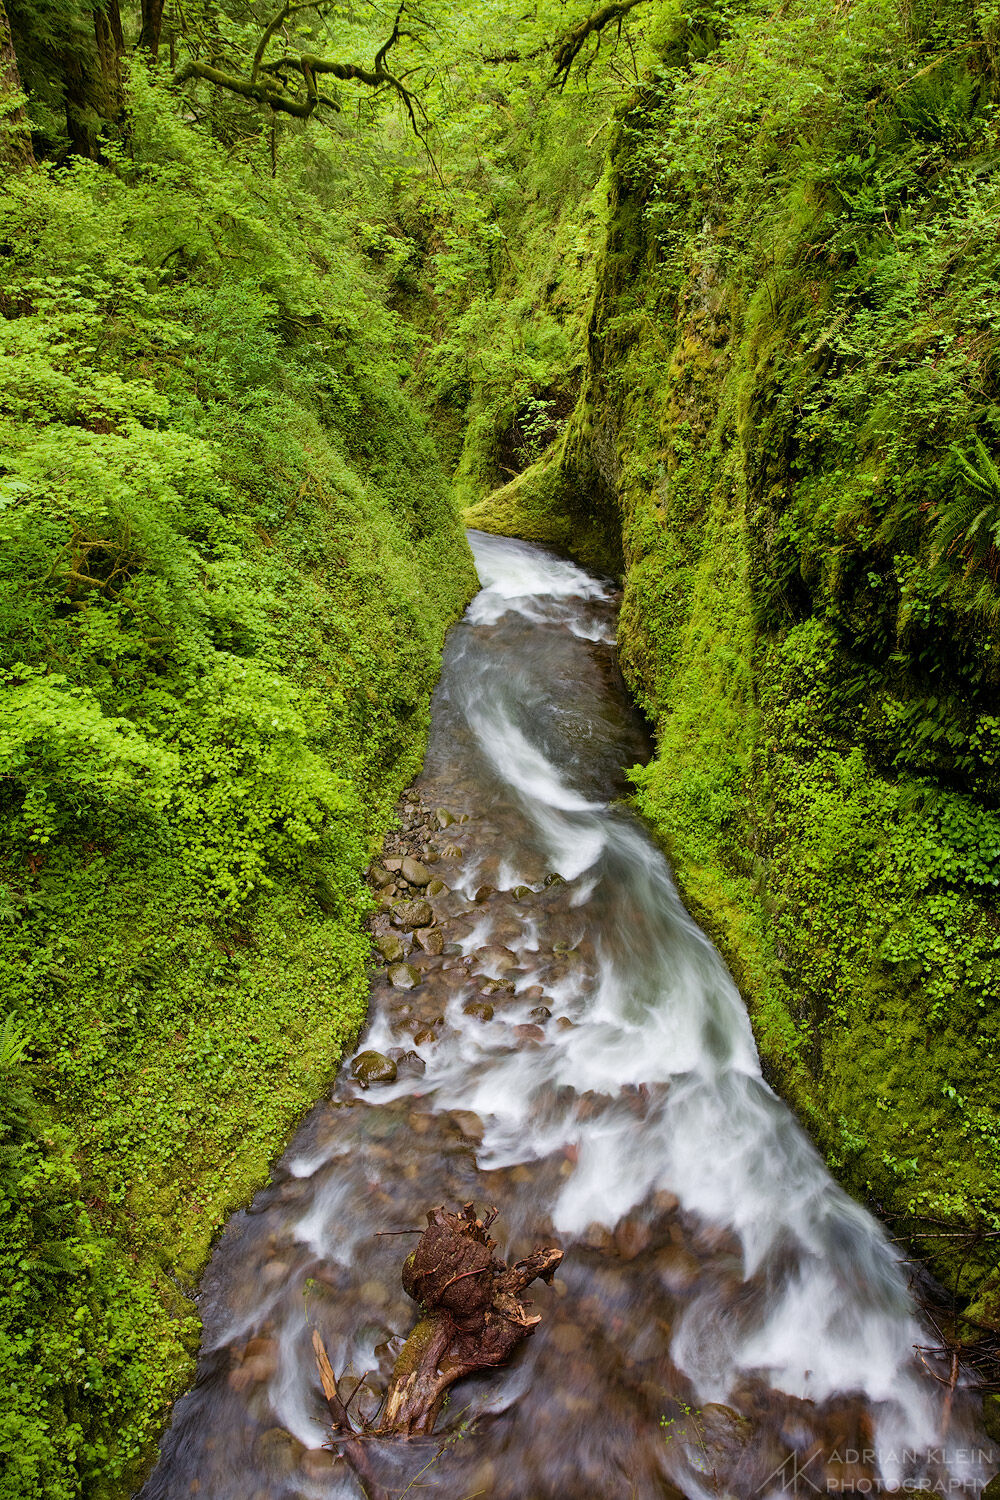 These cliff walls are filled with spring green in the Columbia River Gorge, Oregon. Limited Edition of 50.